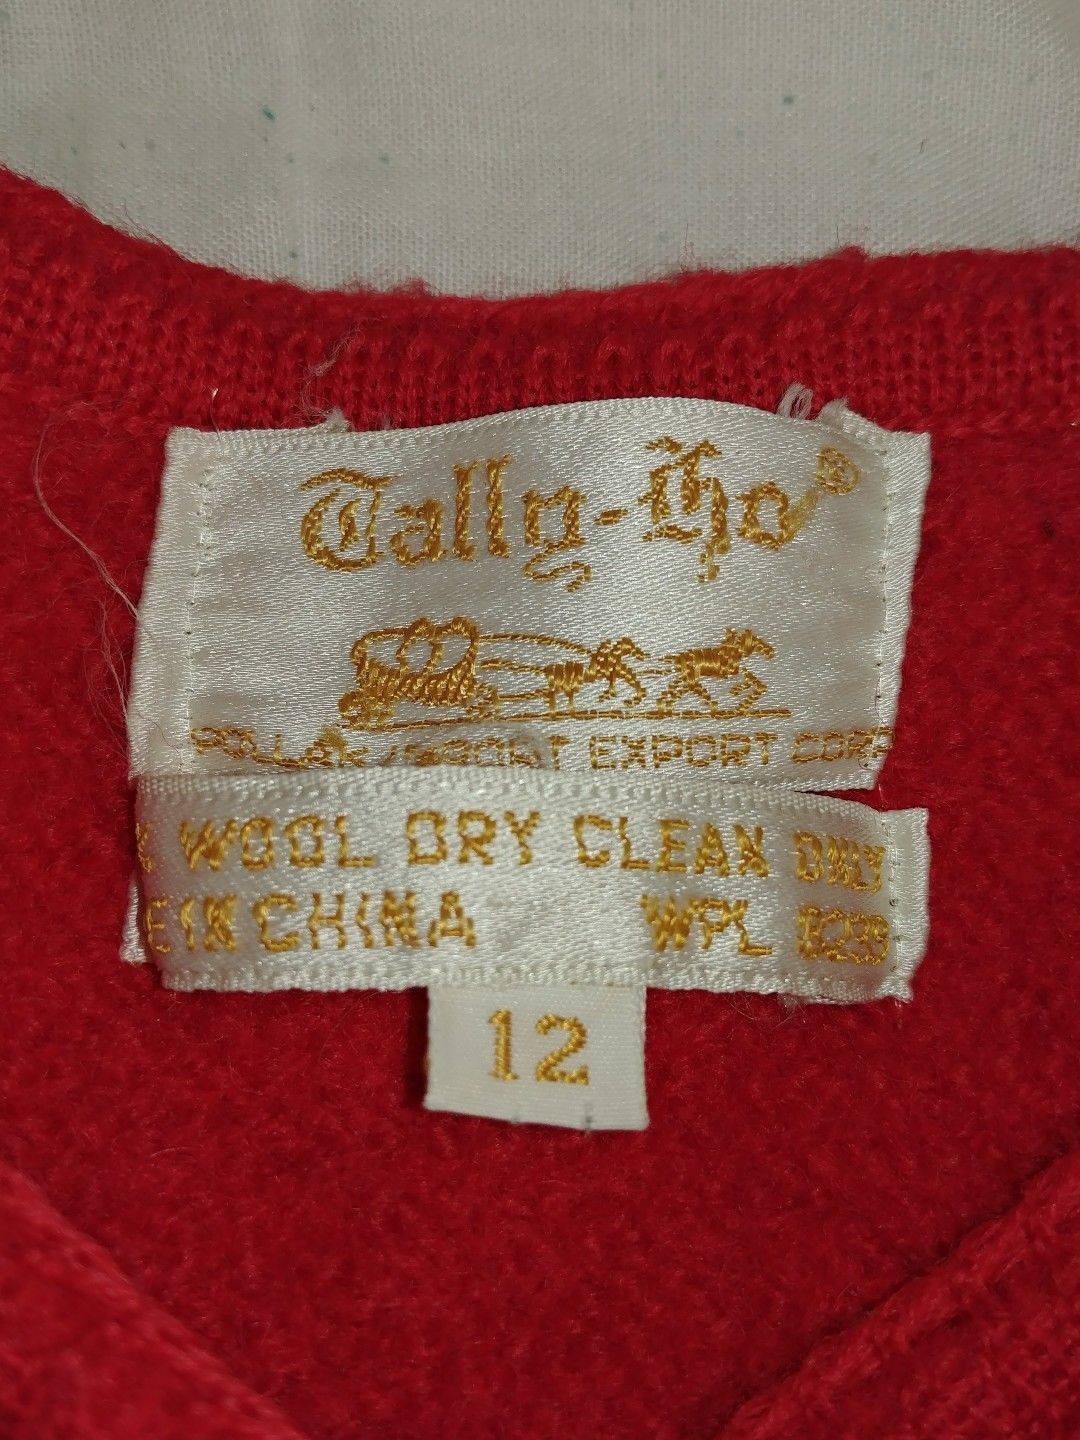 Vintage Tally-Ho women's button up red sweater 100% wool size 12 cardigan